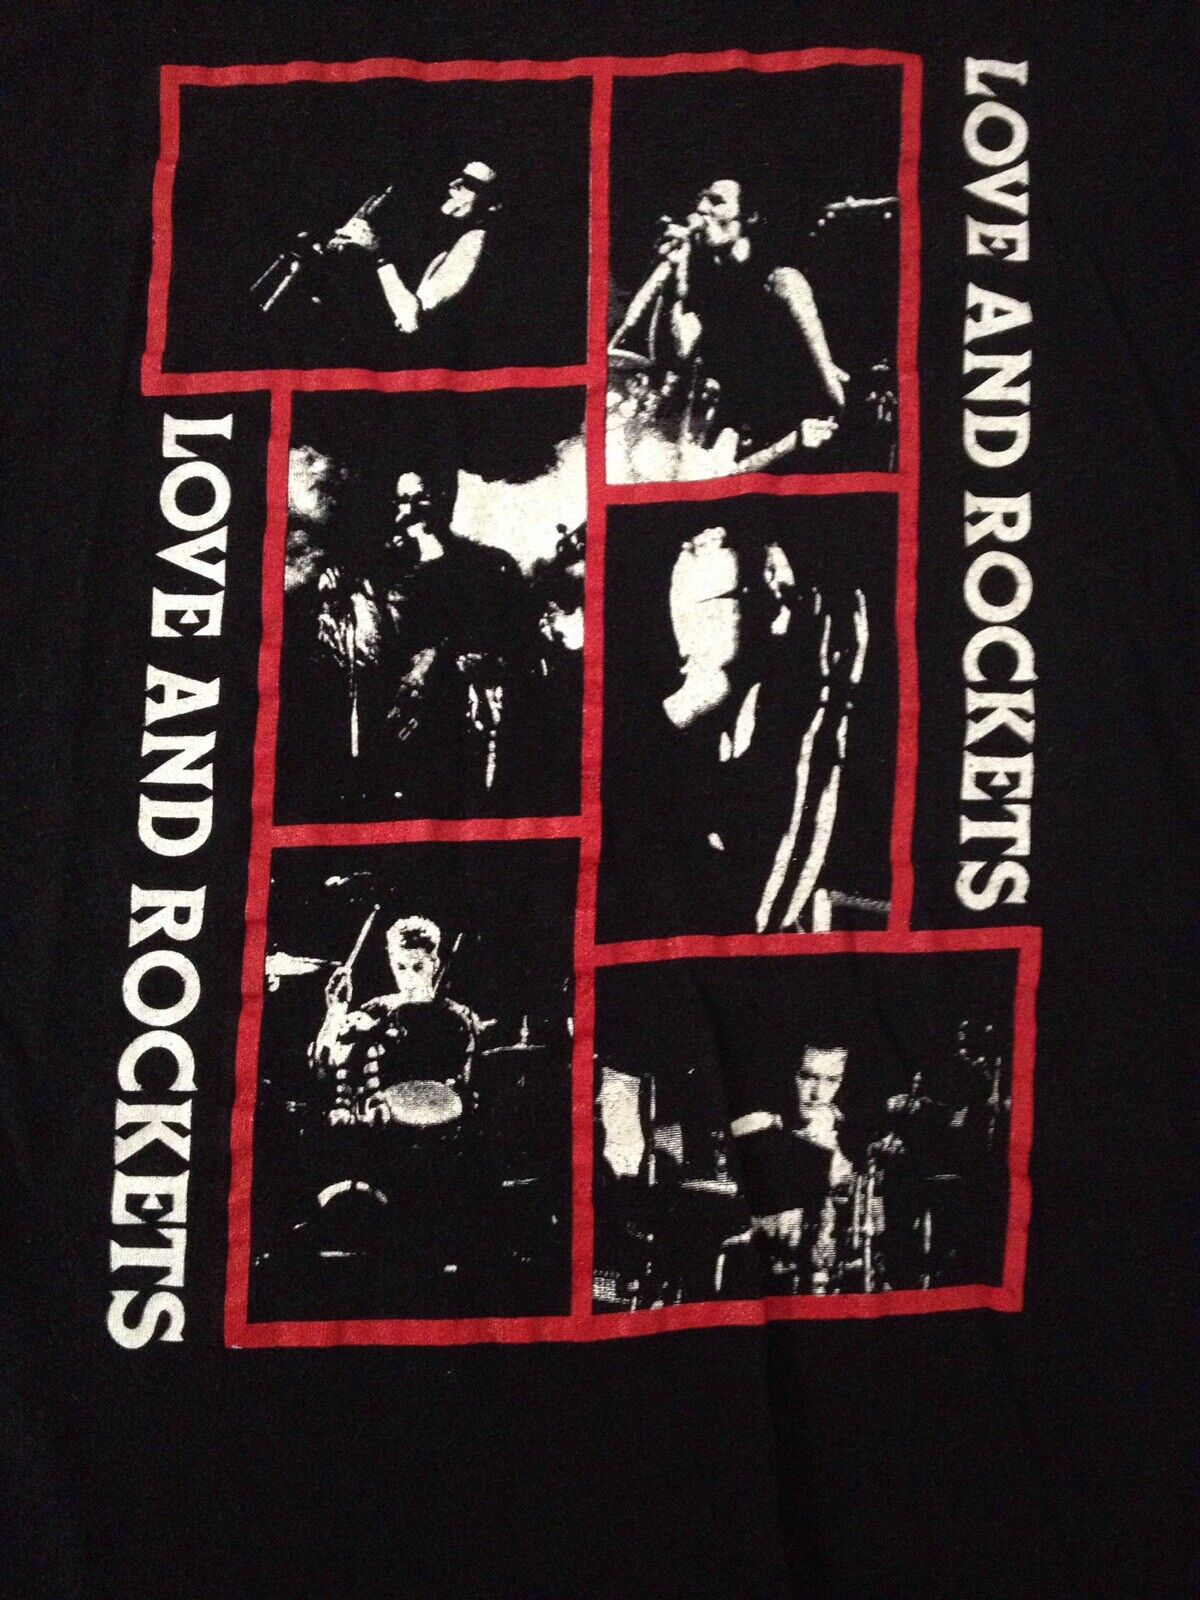 Love and Rockets Vintage T-shirt L 1989 So Alive Tour Band Tee TSHIRT Size L